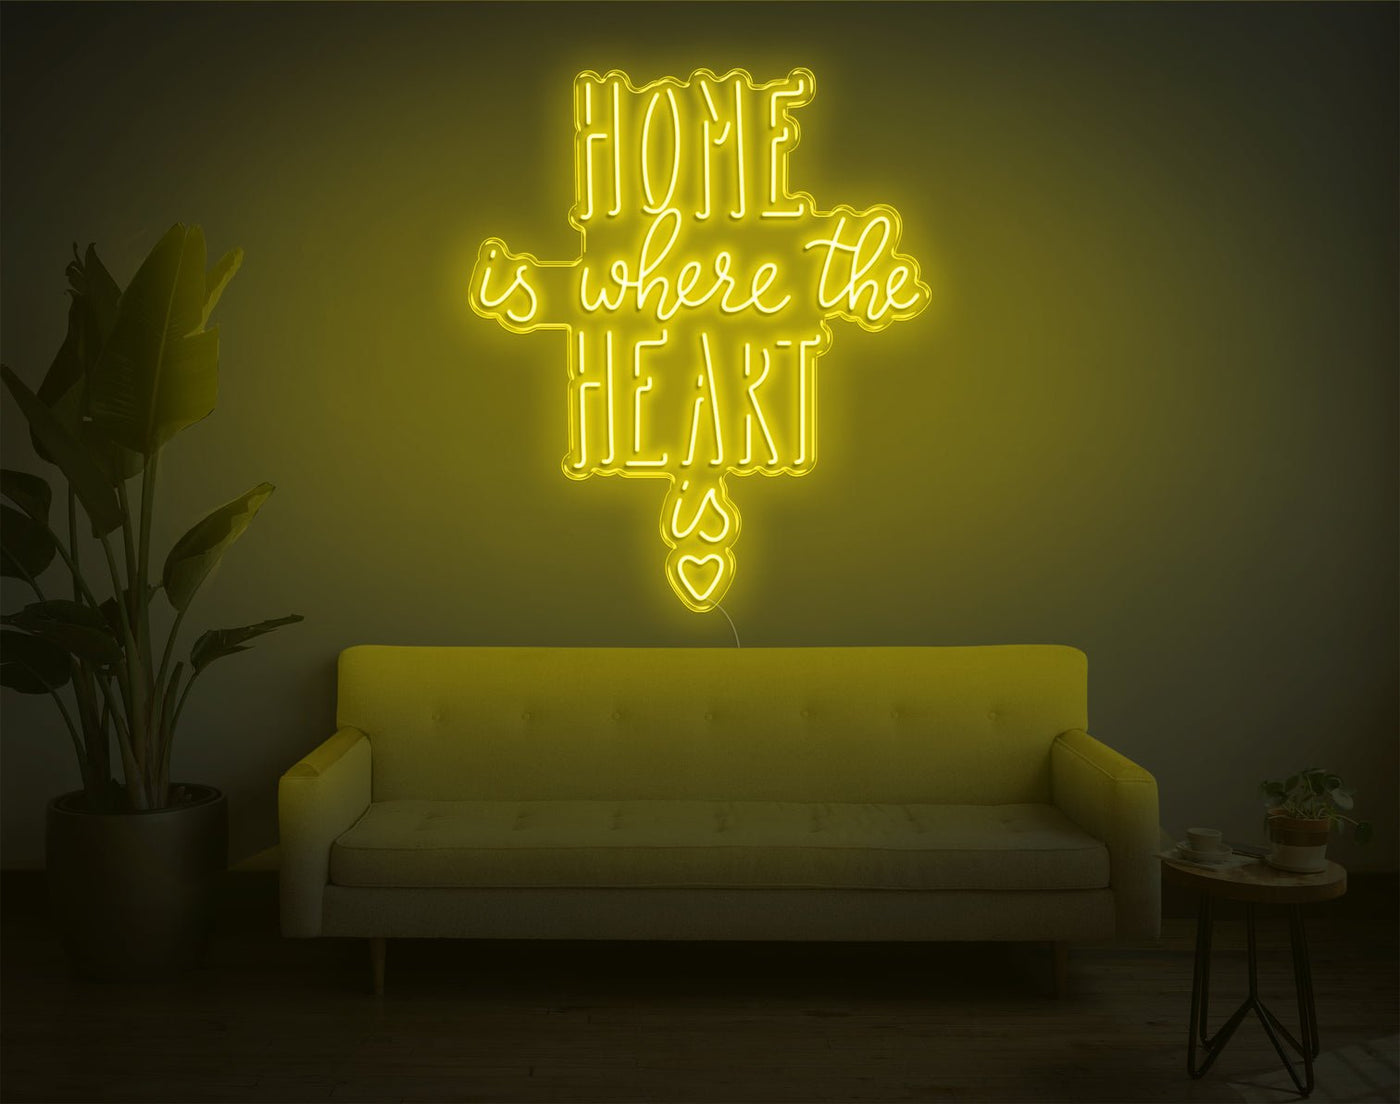 Home Is Where The Heart Is V2 LED Neon Sign - 38inch x 32inchHot Pink